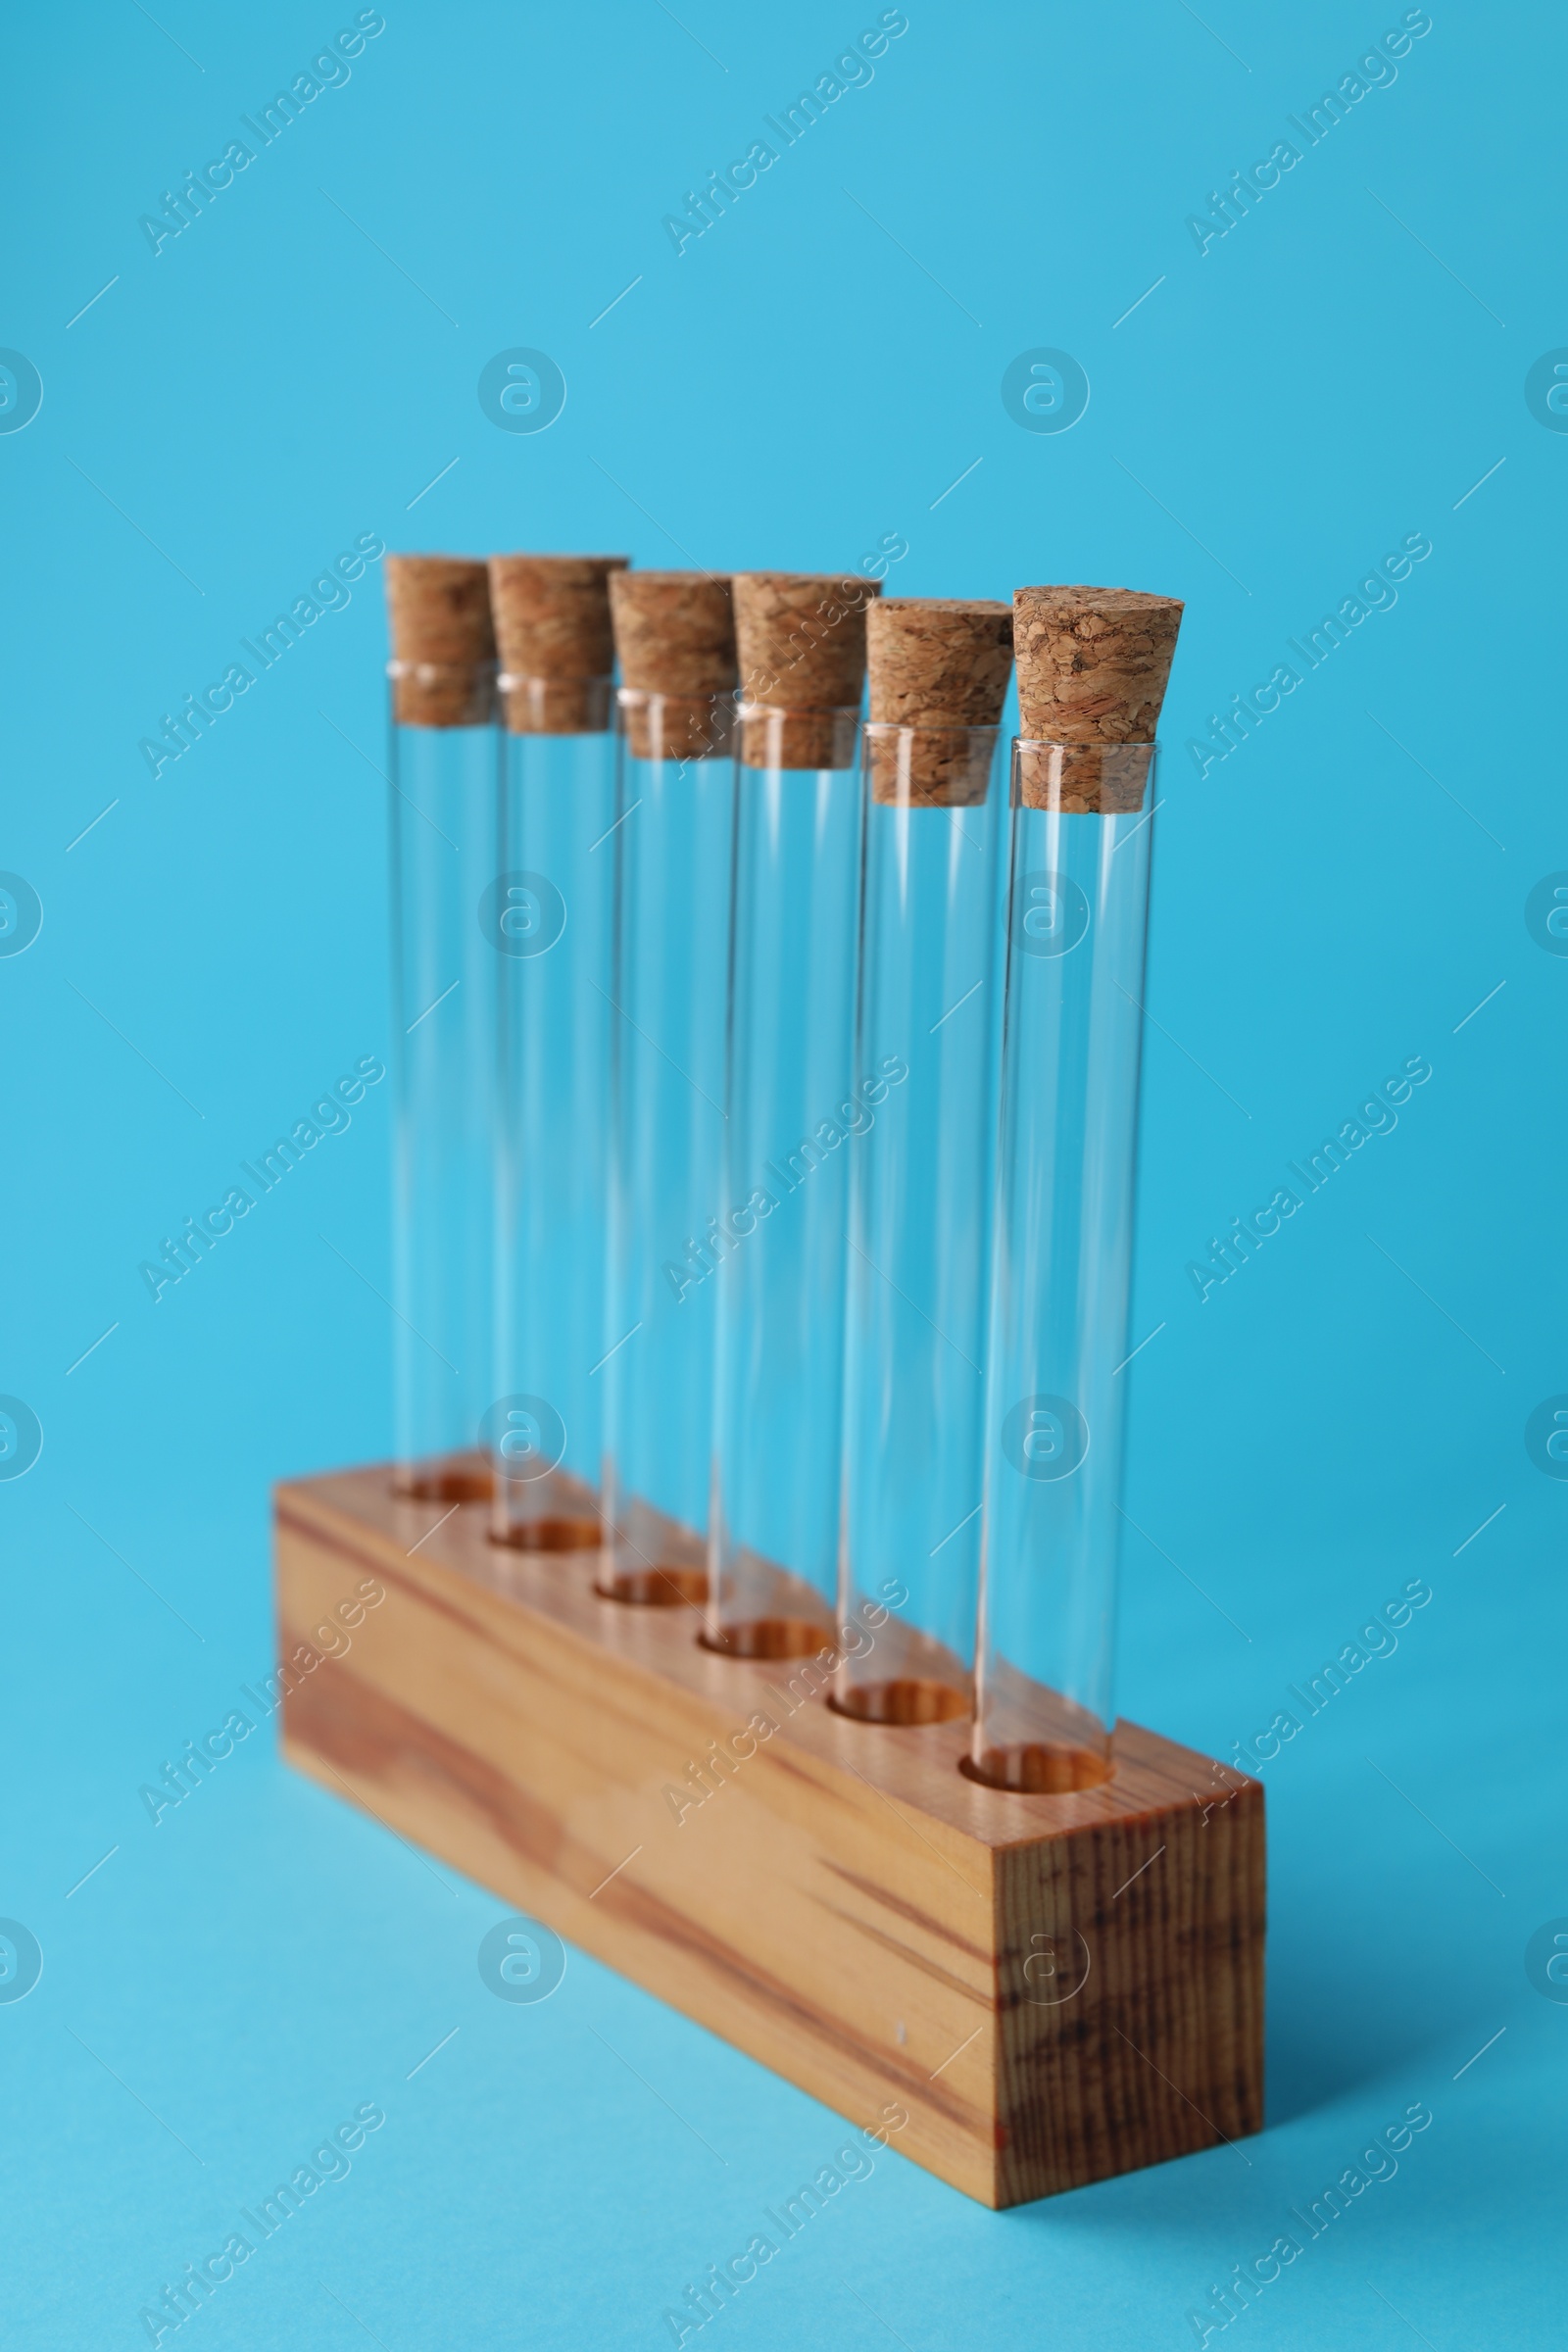 Photo of Test tubes in wooden stand on light blue background. Laboratory glassware